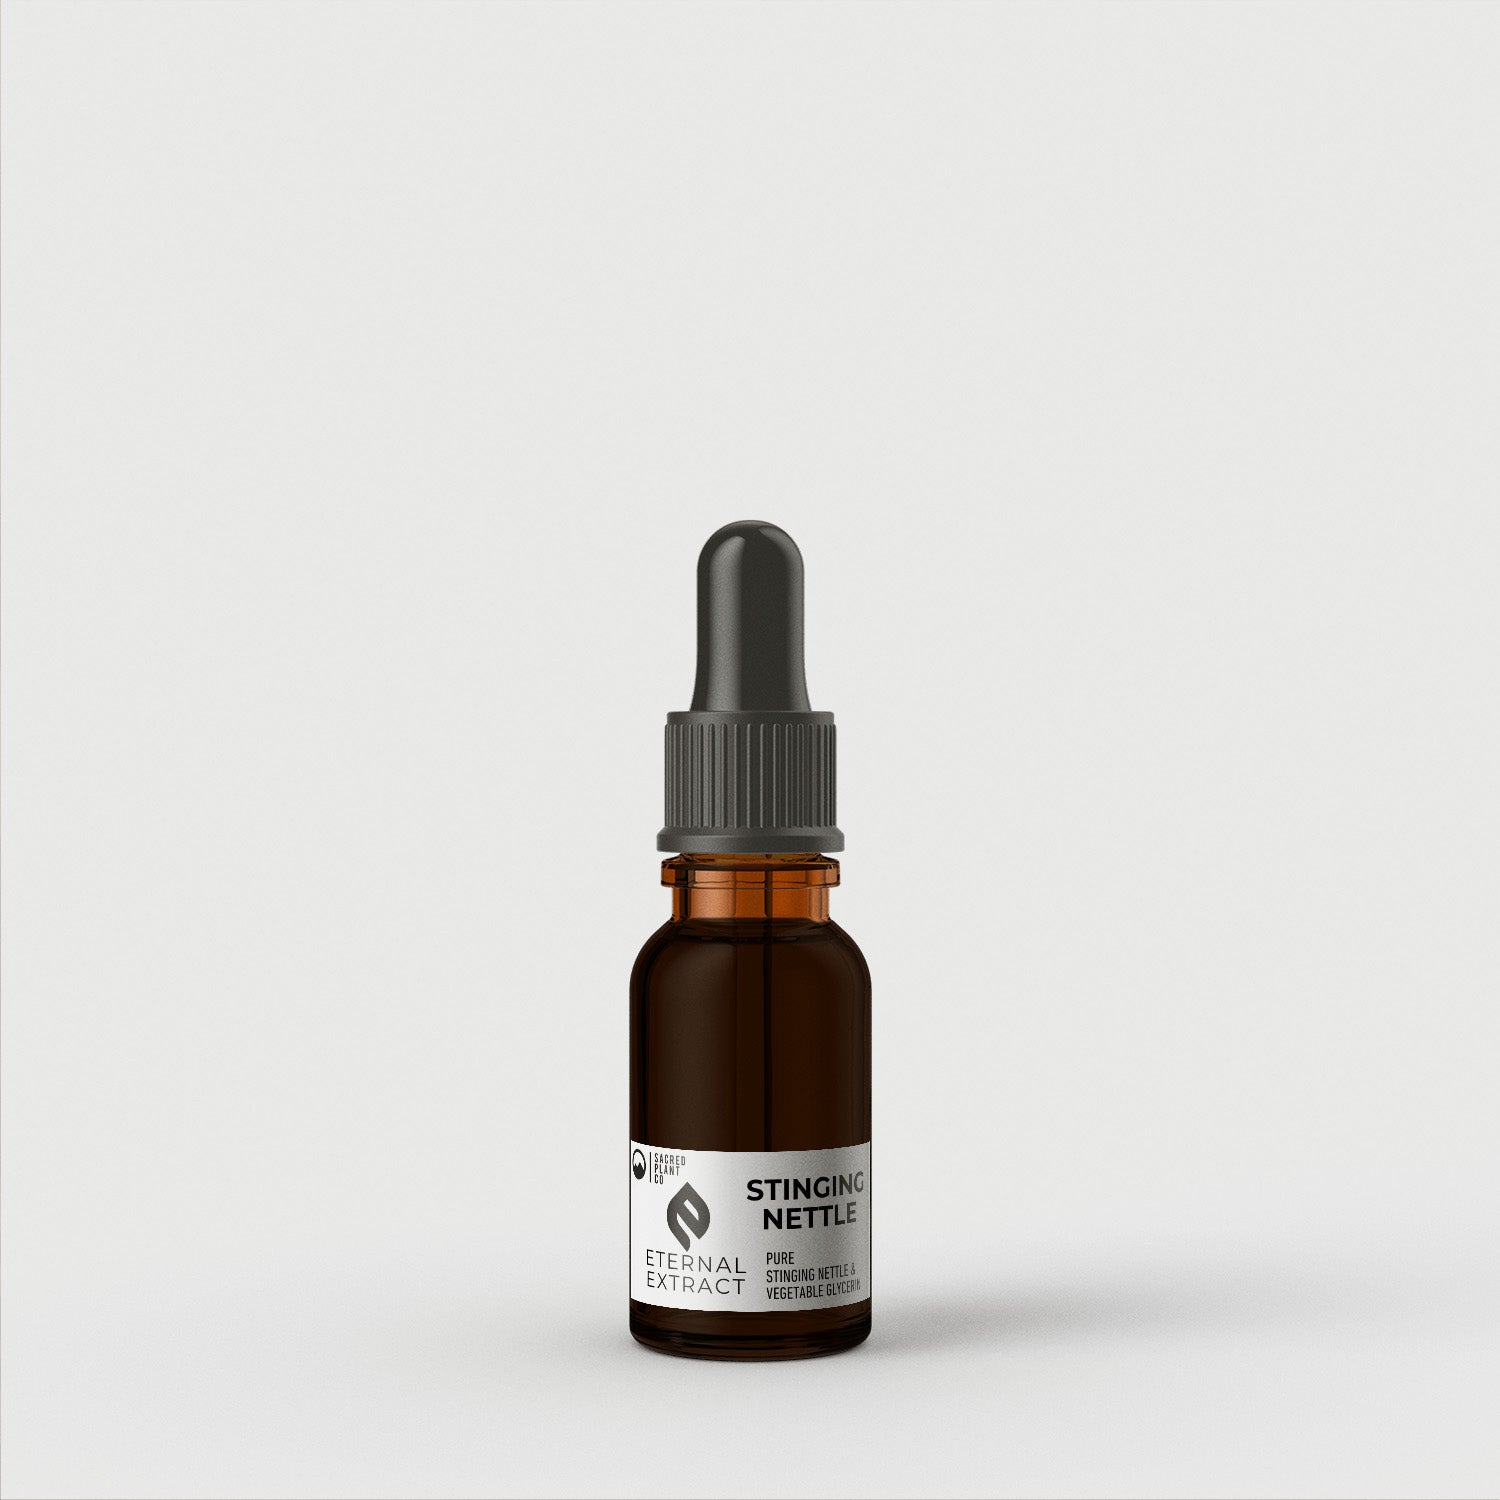 A 15ml bottle of Sacred Plant Co Eternal Stinging Nettle Extract Tincture with a black dropper cap on a neutral background.